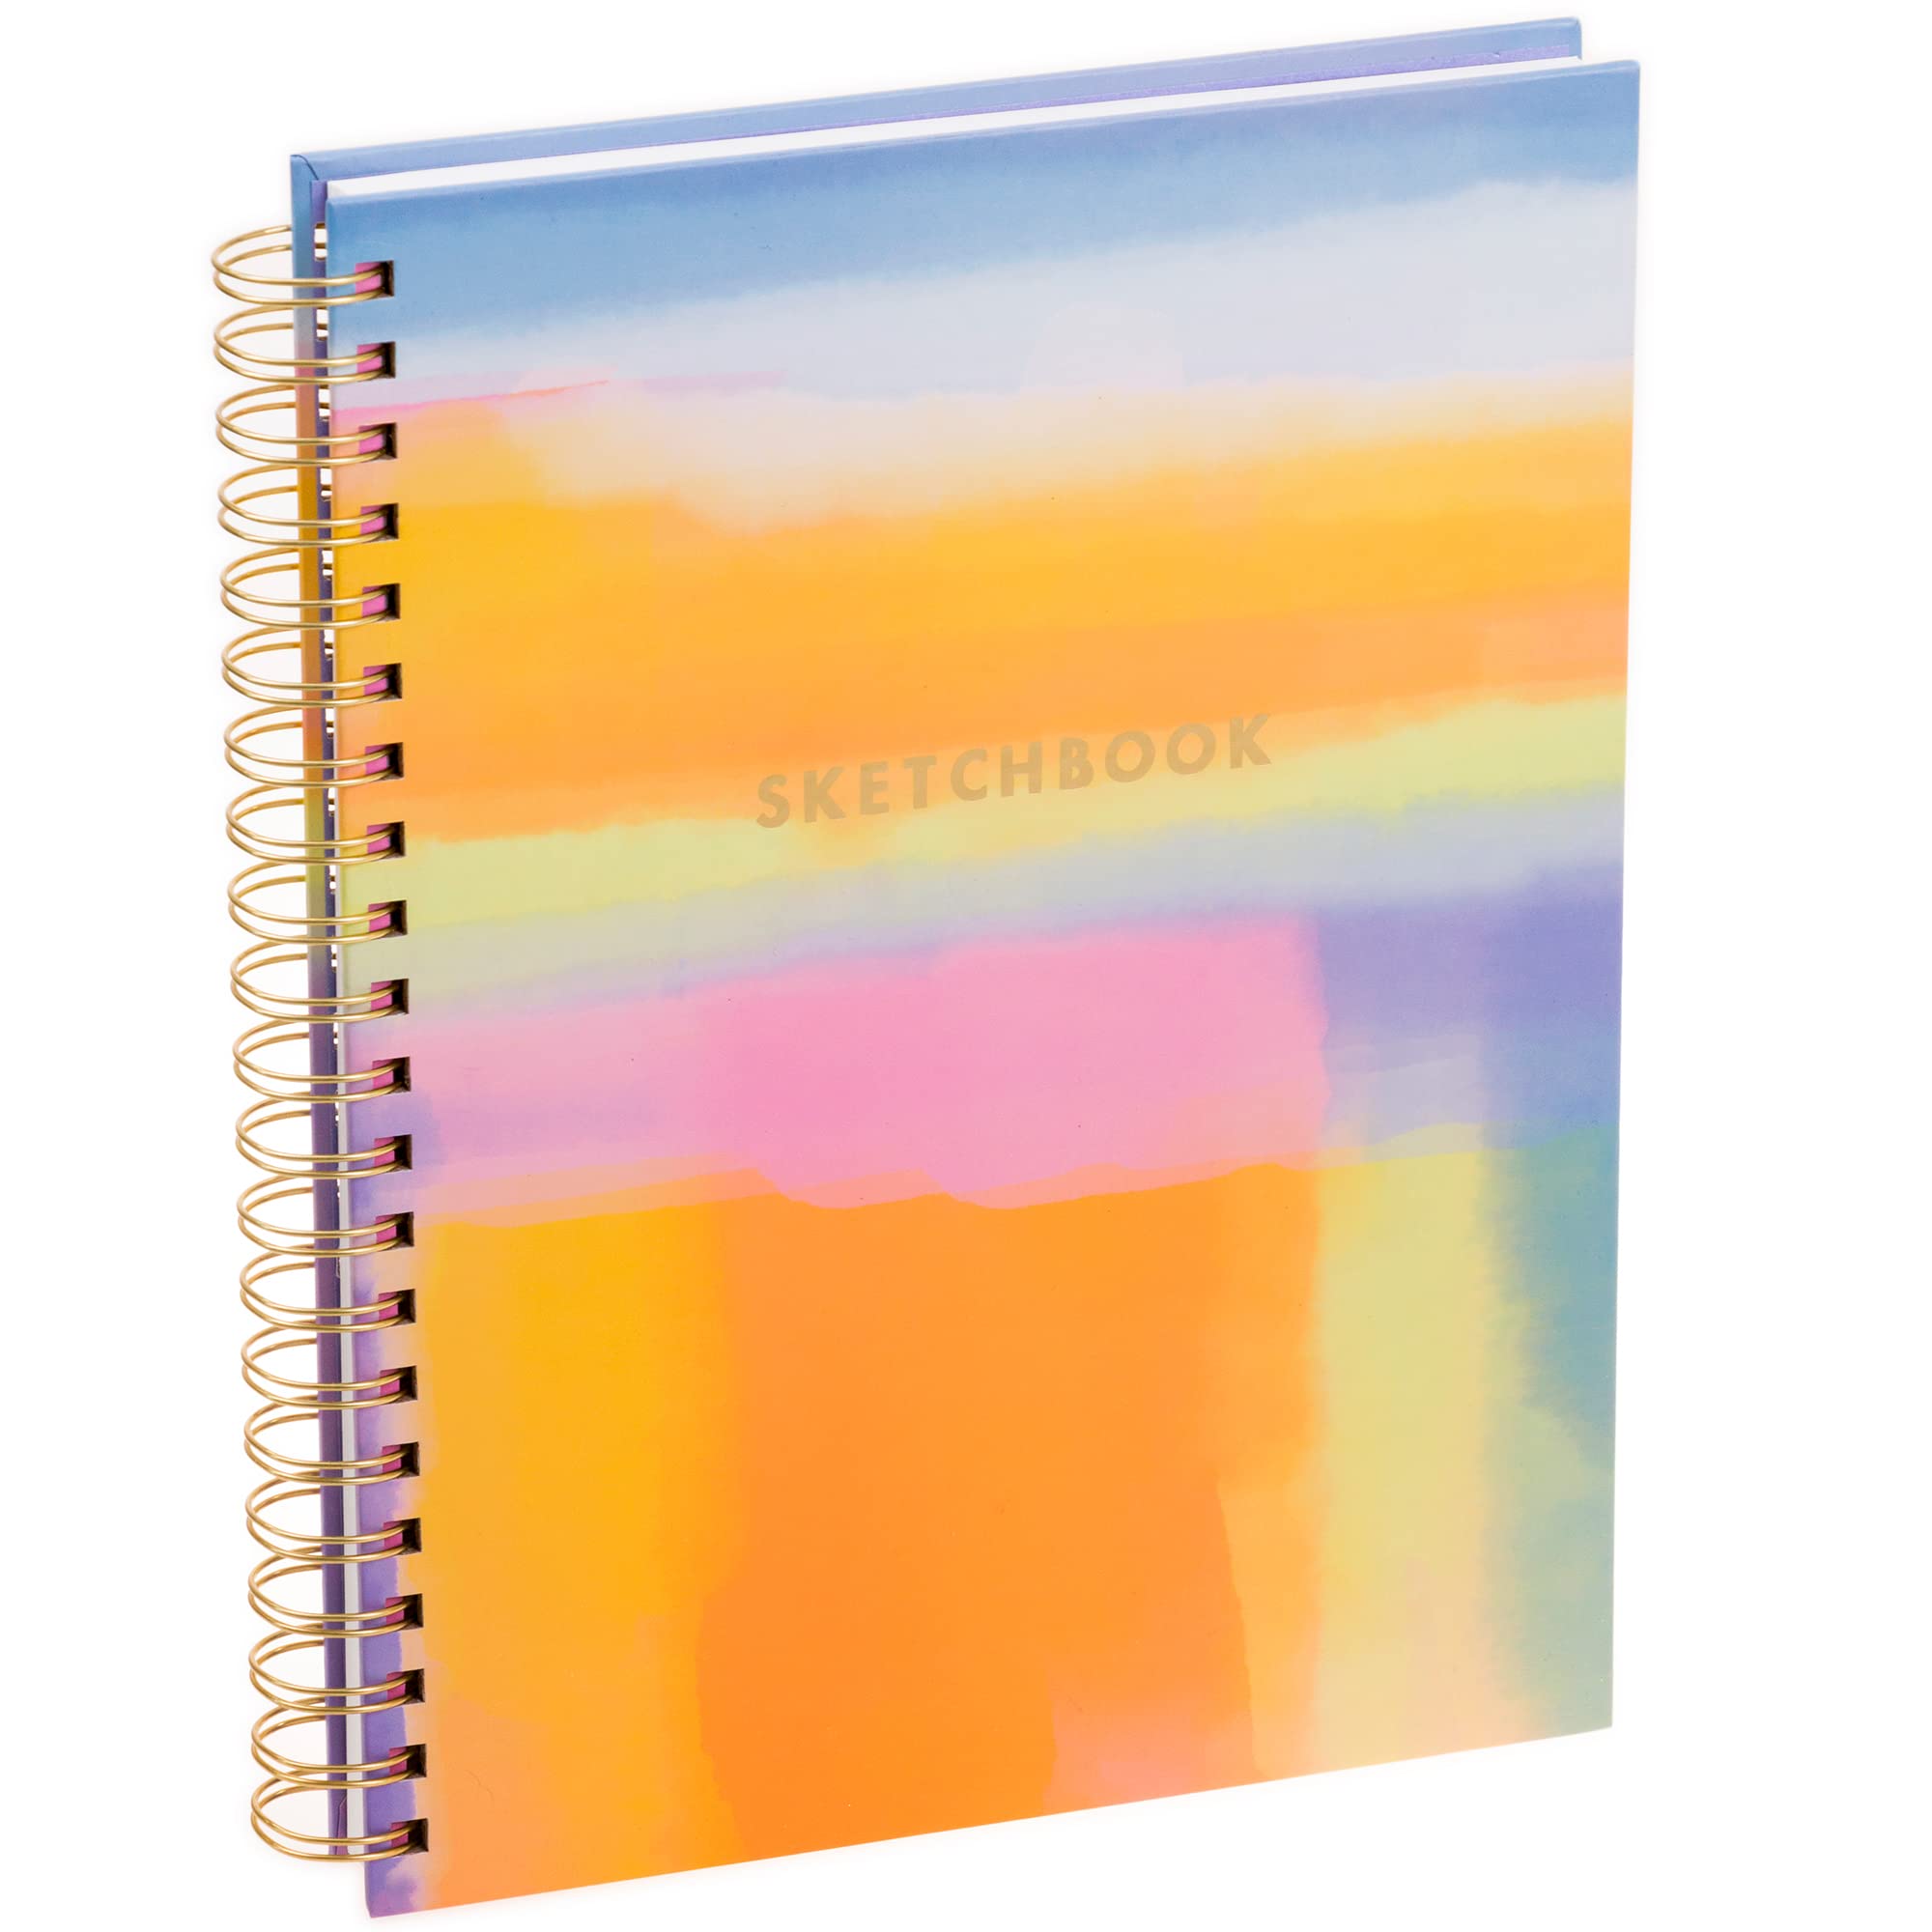 Sketchbook Suitable for Kids, Teens, and Adults